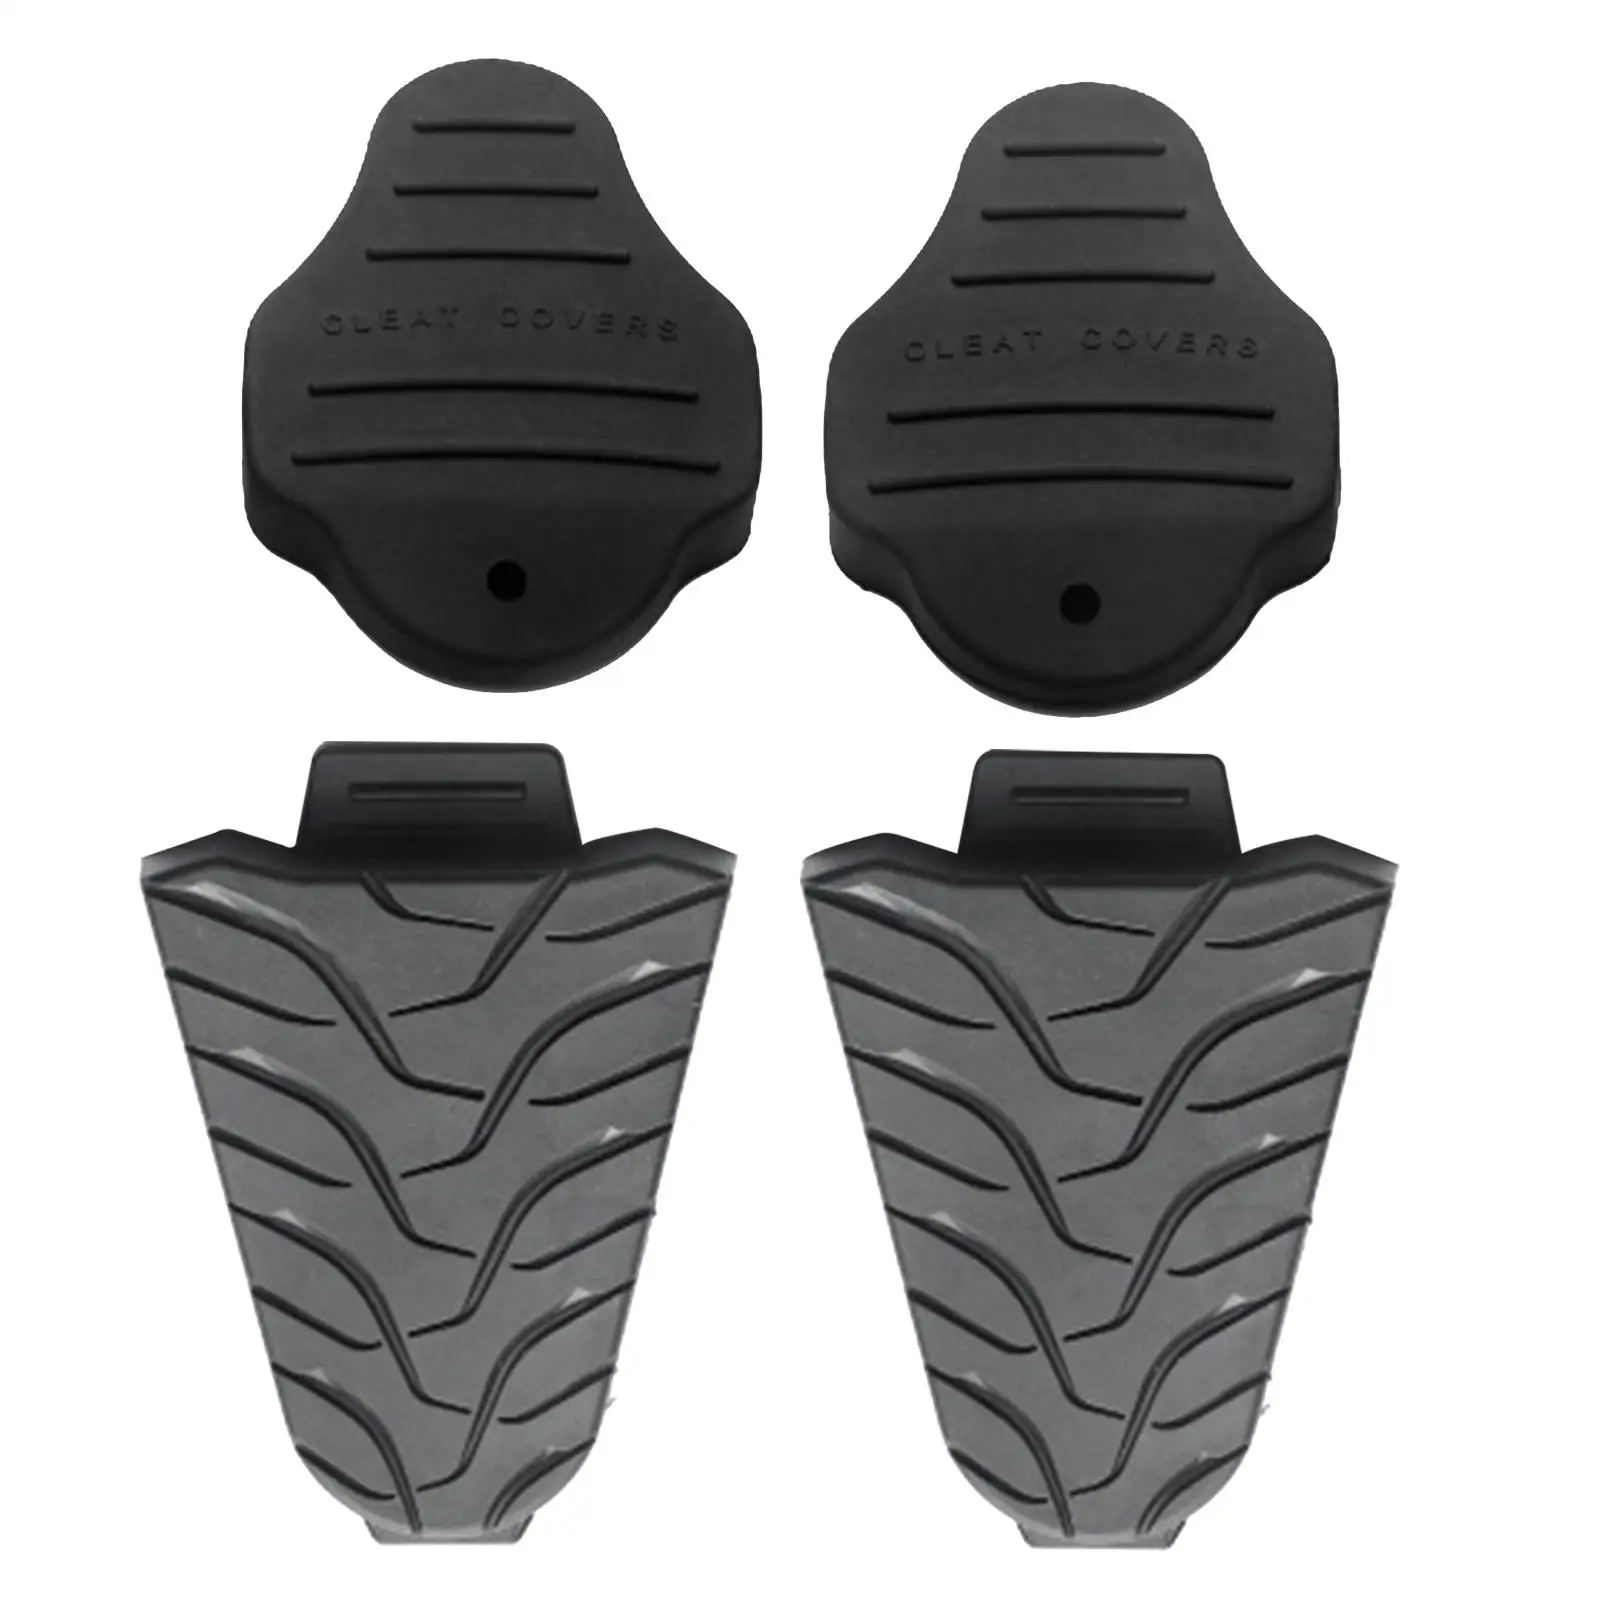 2 Pieces Bike Pedal Cleat Covers Platform Pedal Converter Universal Quick Release Riding Shoes Part Bike Cleat Cover